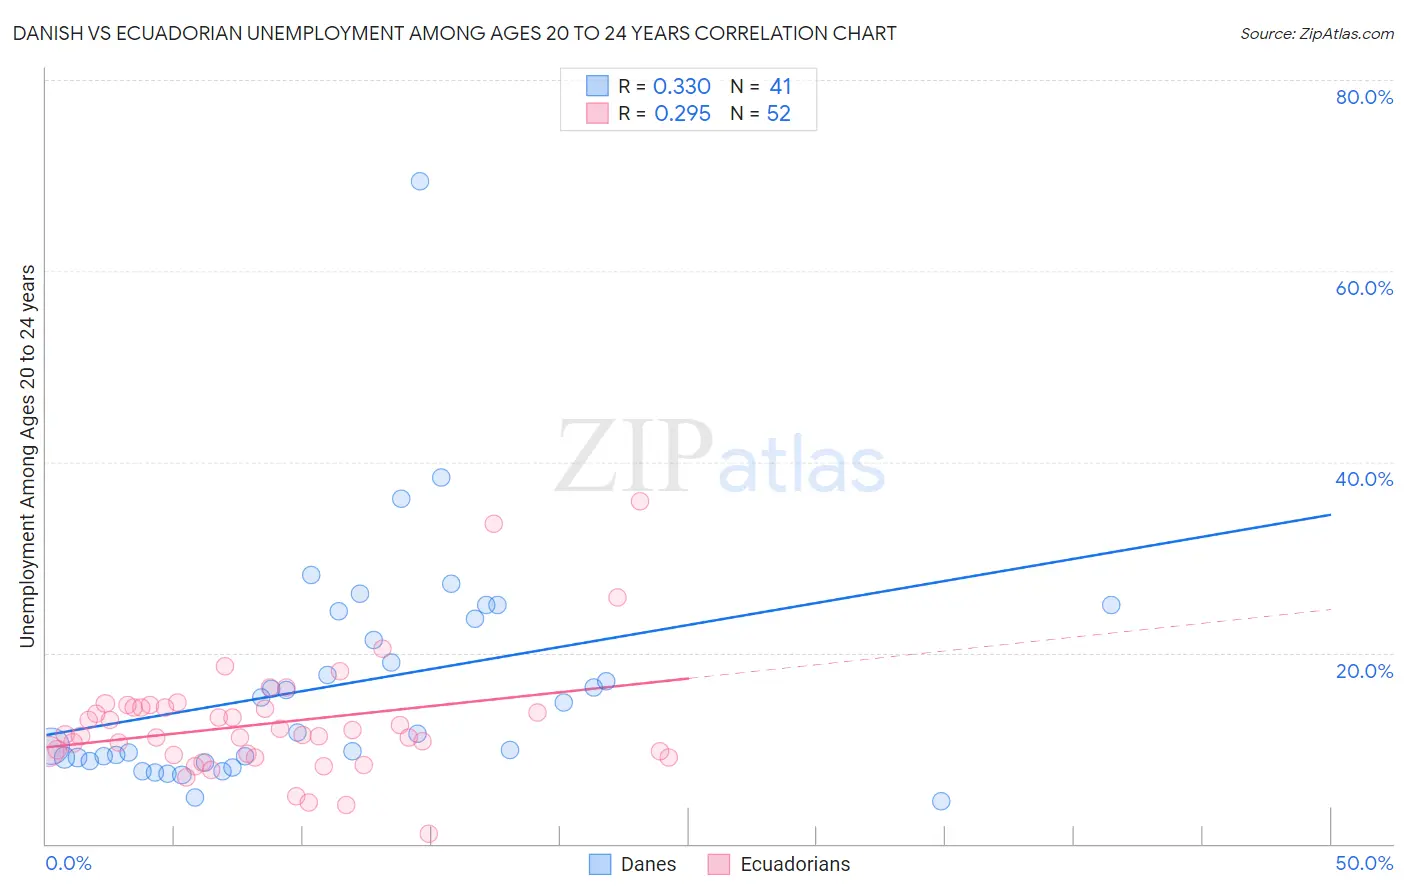 Danish vs Ecuadorian Unemployment Among Ages 20 to 24 years